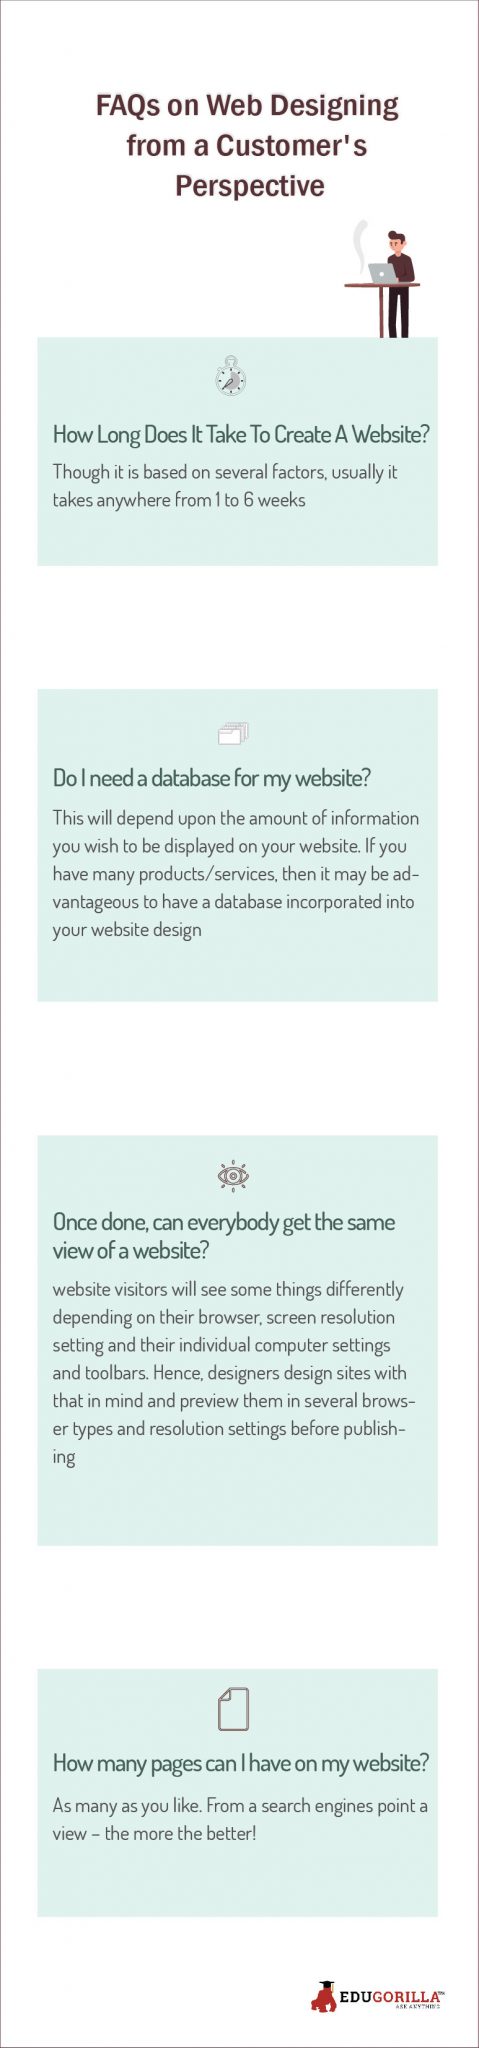 FAQs on Web Designing from a Customer's Perspective